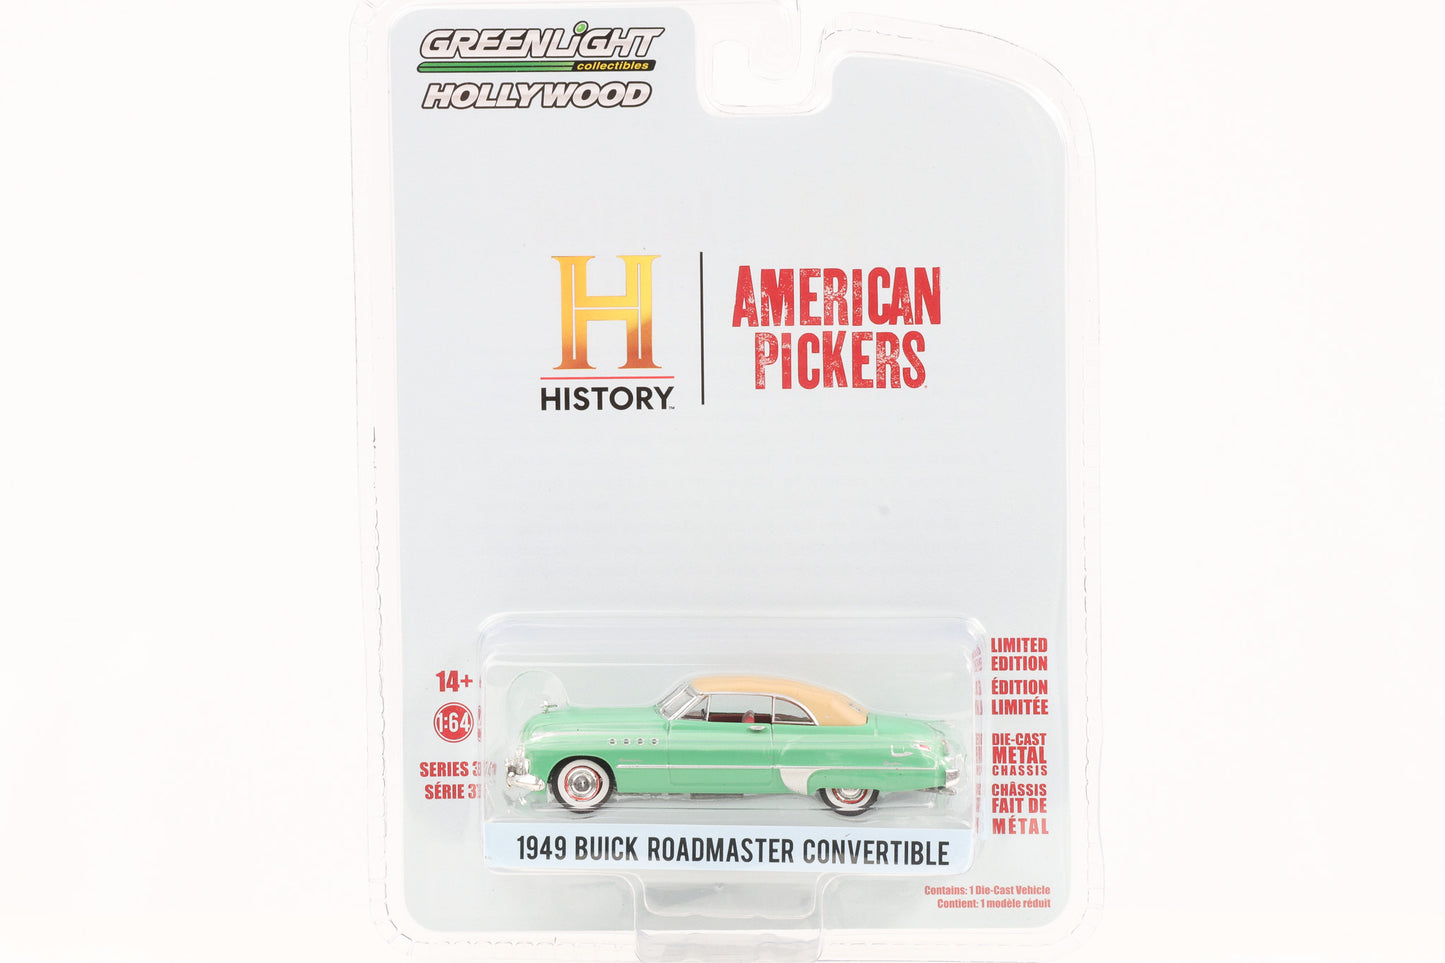 1:64 American Pickers 1949 Buick Roadmaster Convertible Greenlight Hollywood